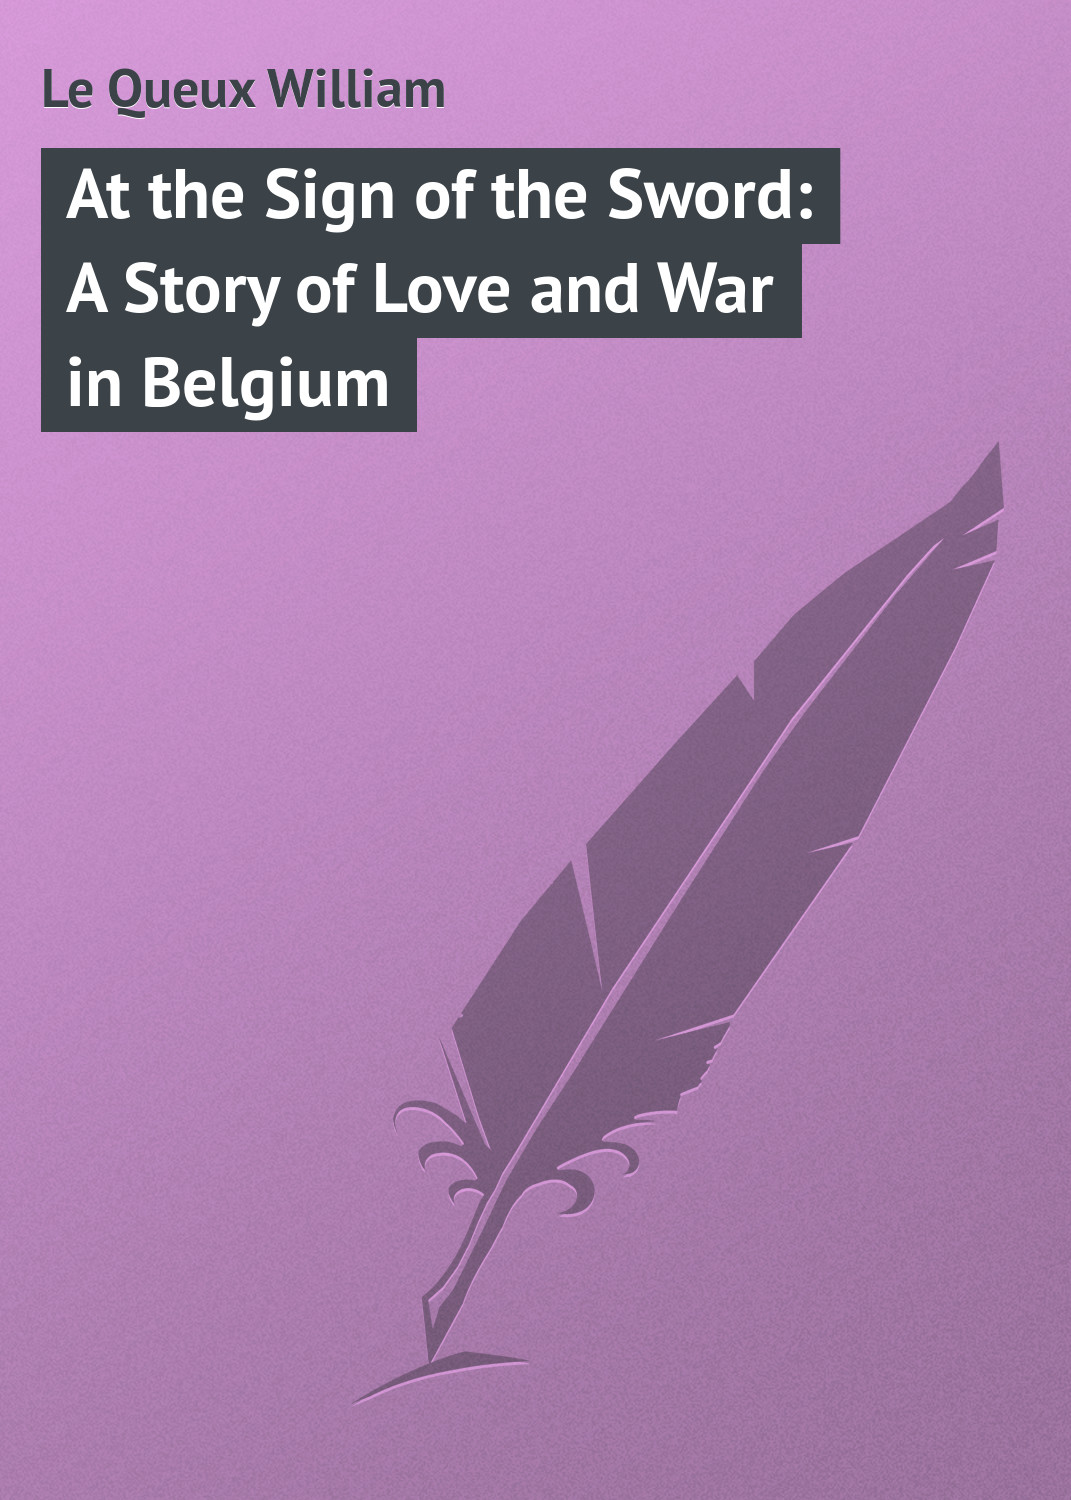 At the Sign of the Sword: A Story of Love and War in Belgium